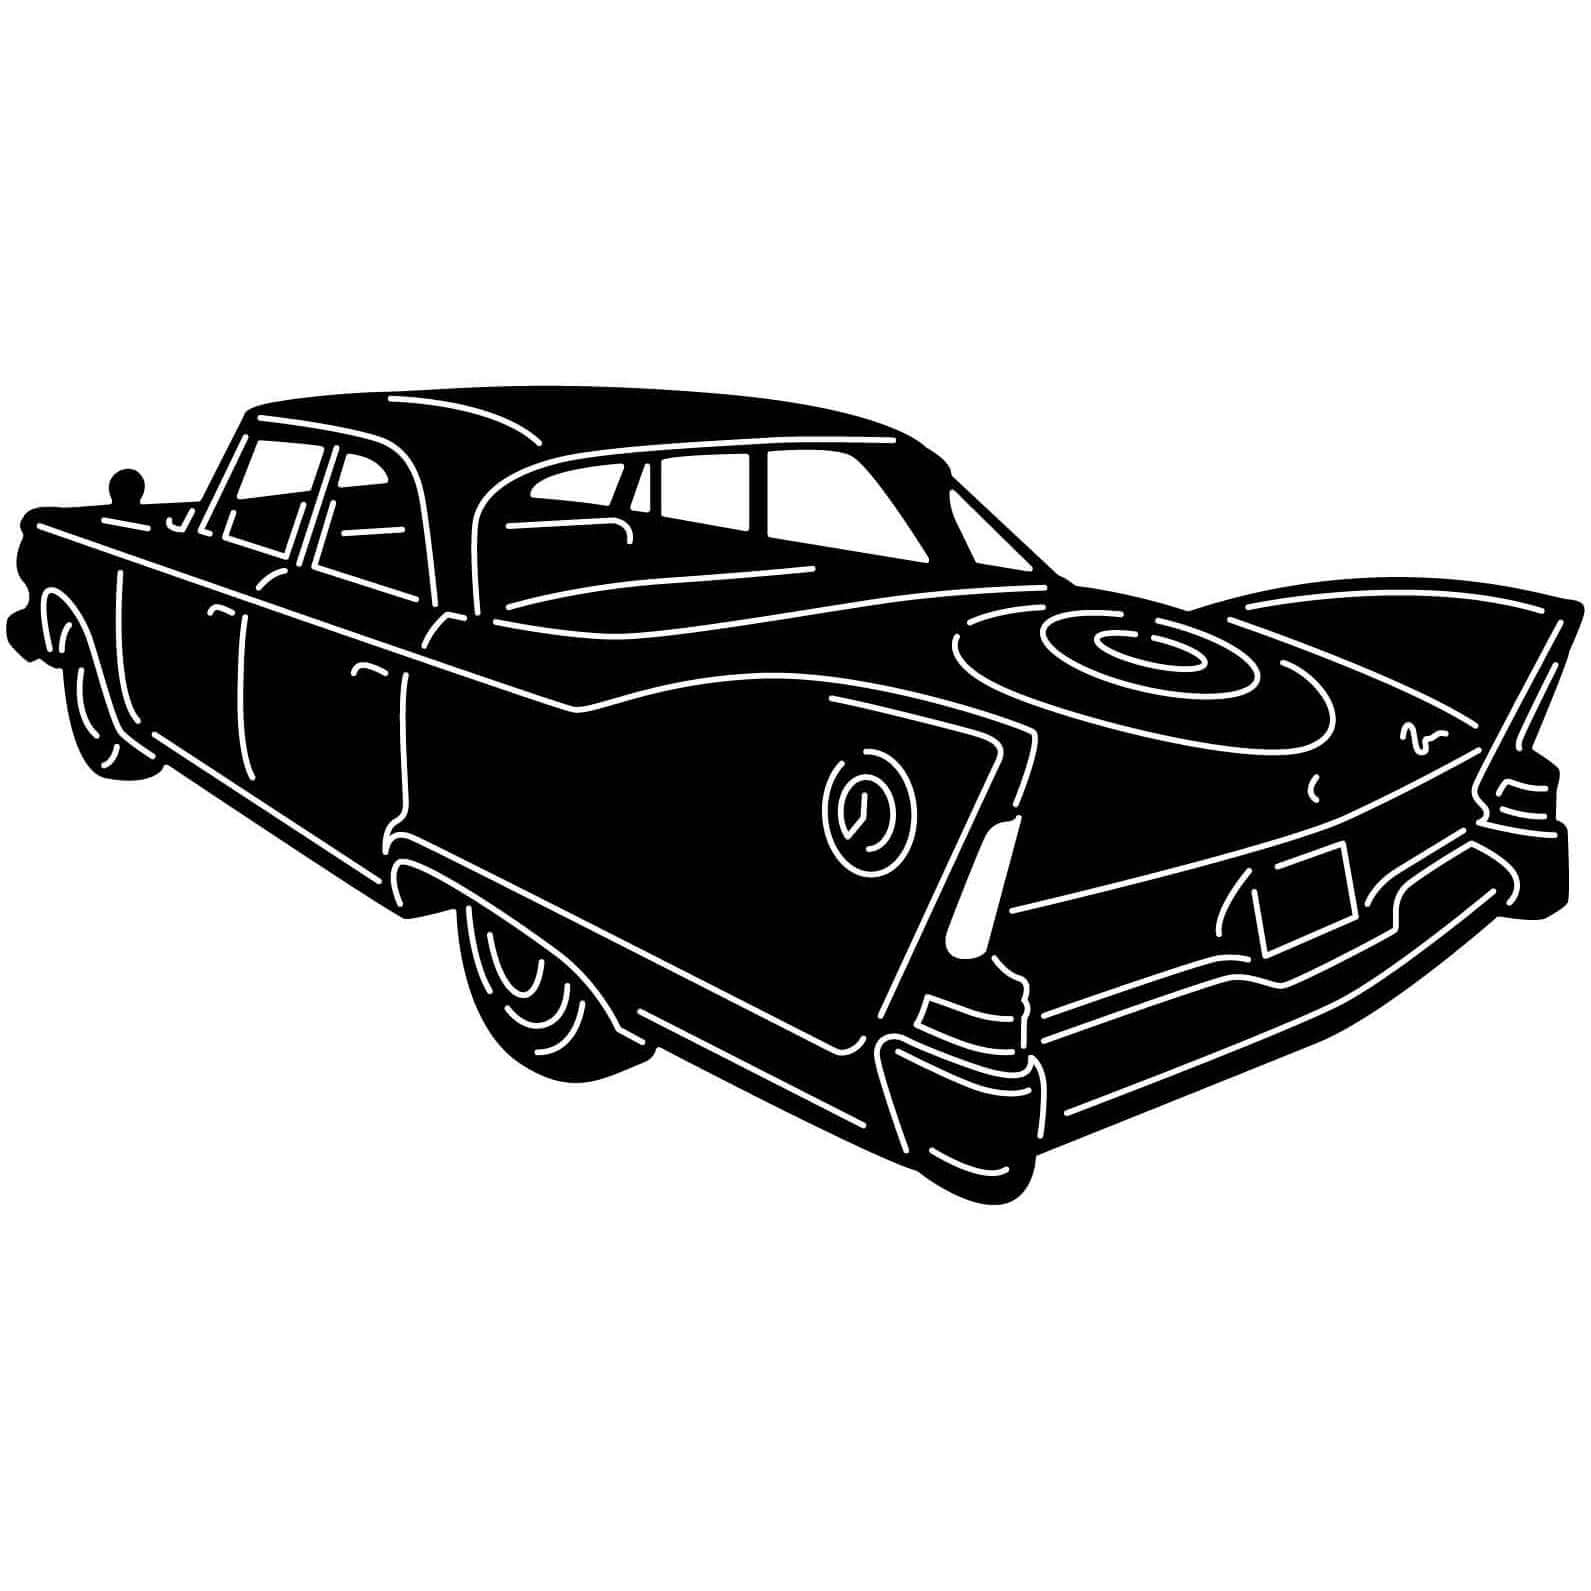 1960 Fury Old Muscle Car-DXF files Cut Ready for CNC-DXFforCNC.com